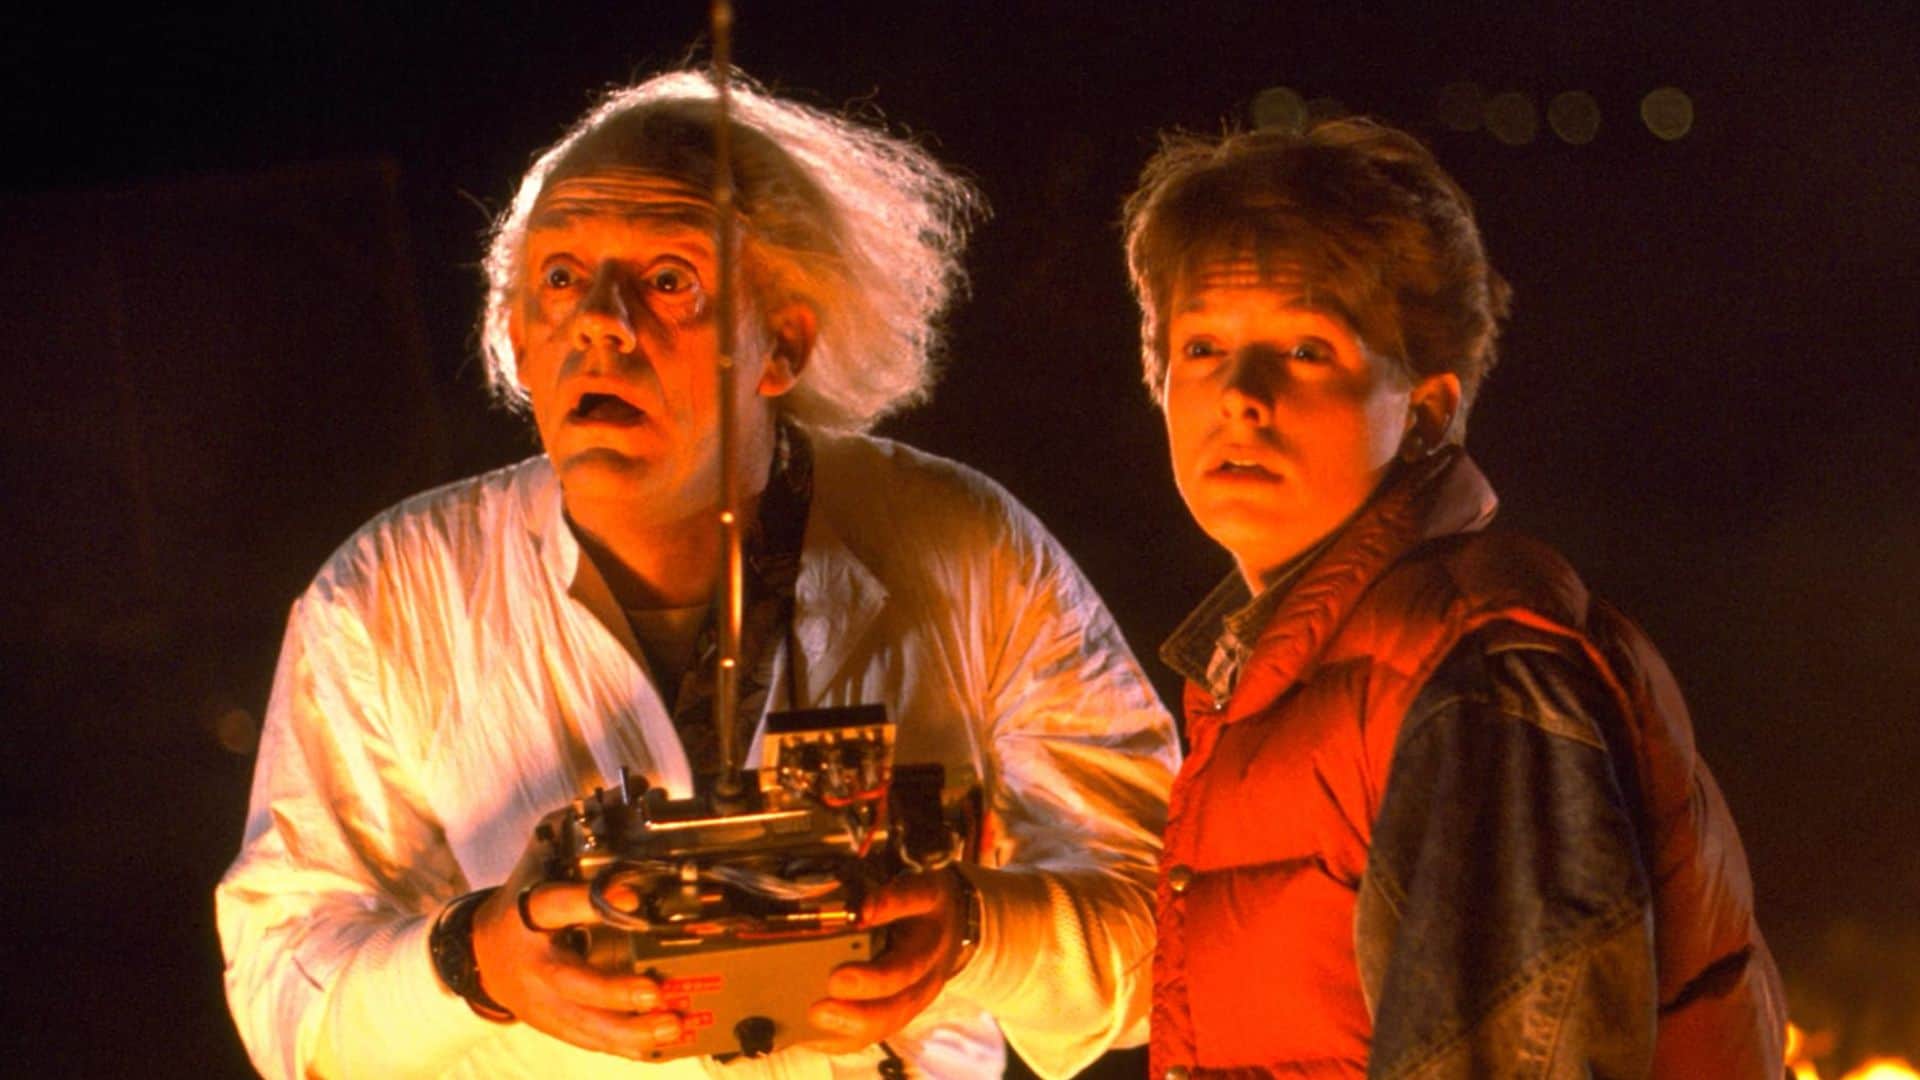 A white-haired man holding a remote control and a young man looking bewildered in this image from Amblin Pictures.